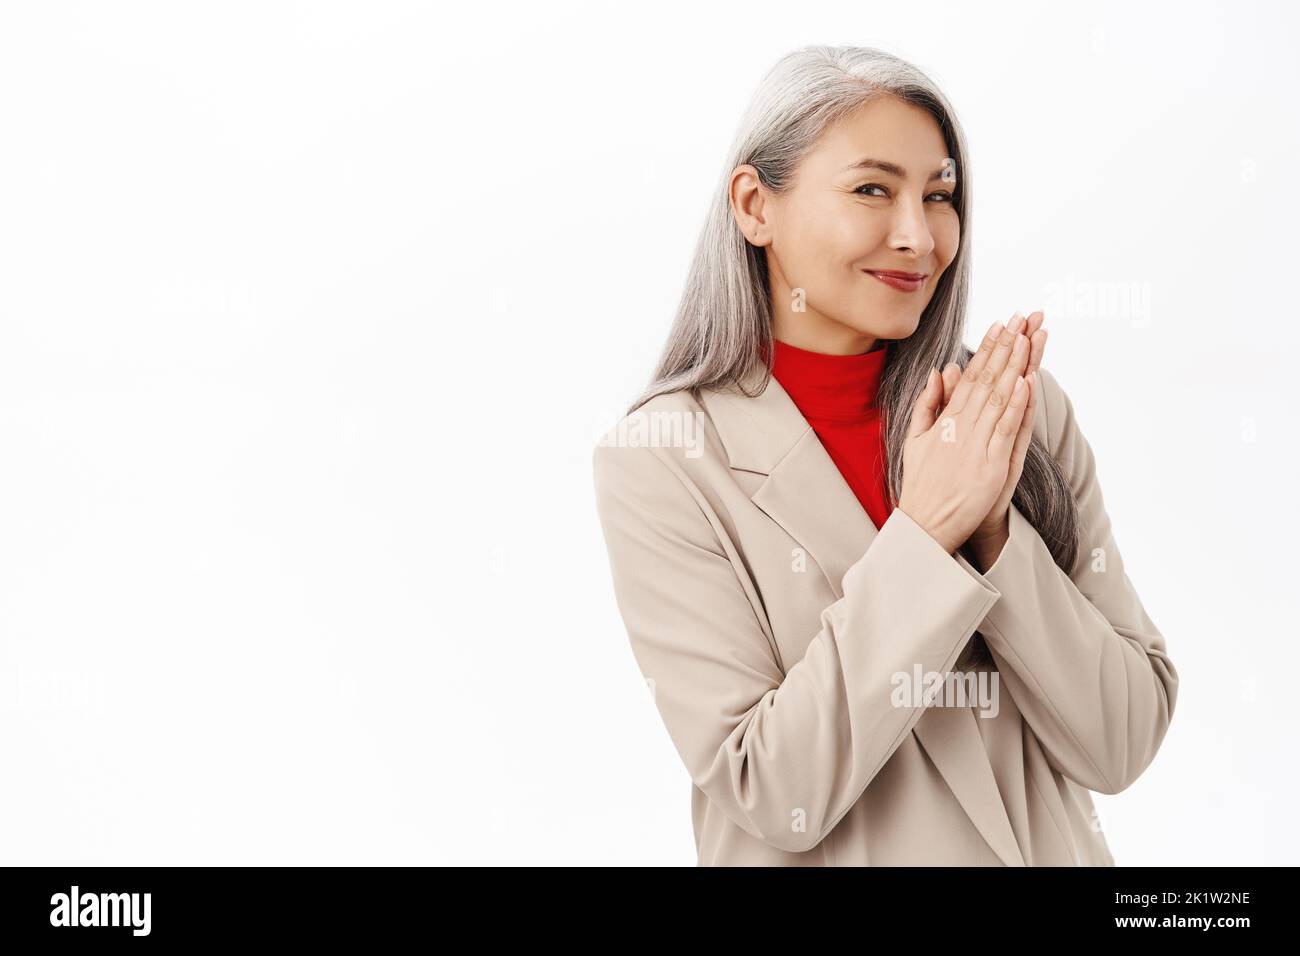 Portrait of smiling pleased asian senior woman, businesswoman rubbing hands with satisfied face expression, standing over white background. Stock Photo